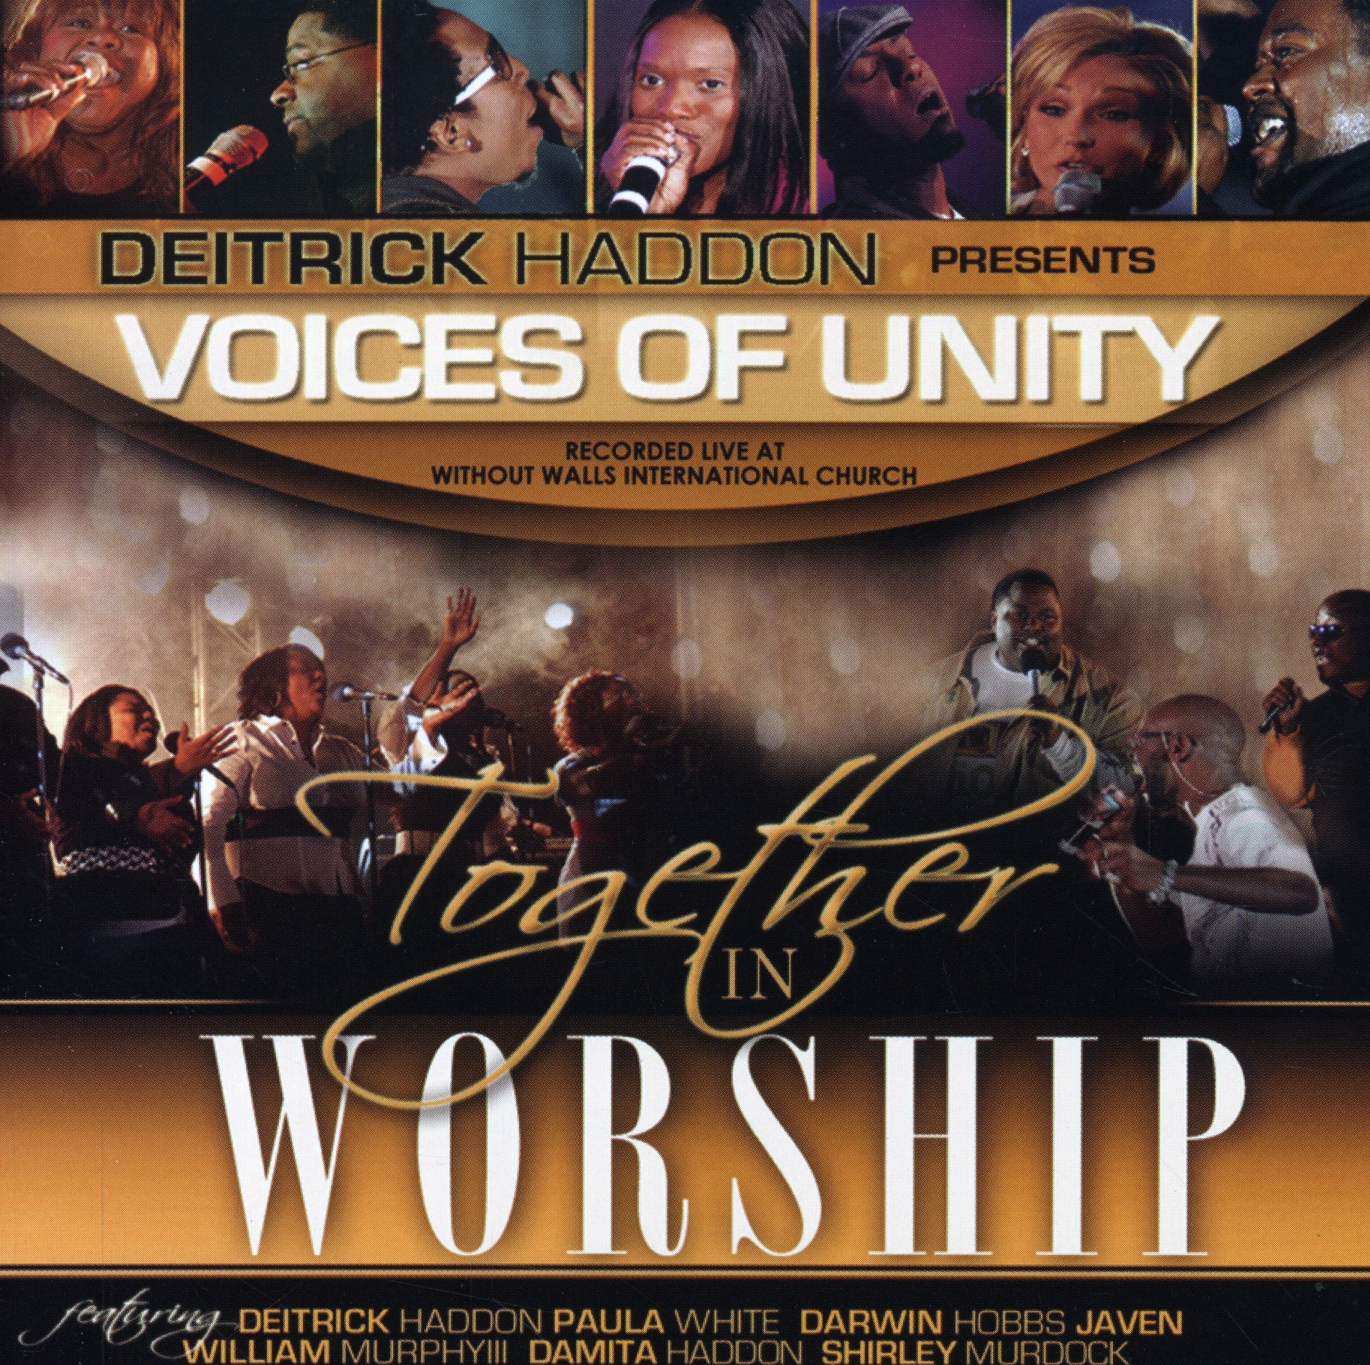 TOGETHER IN WORSHIP